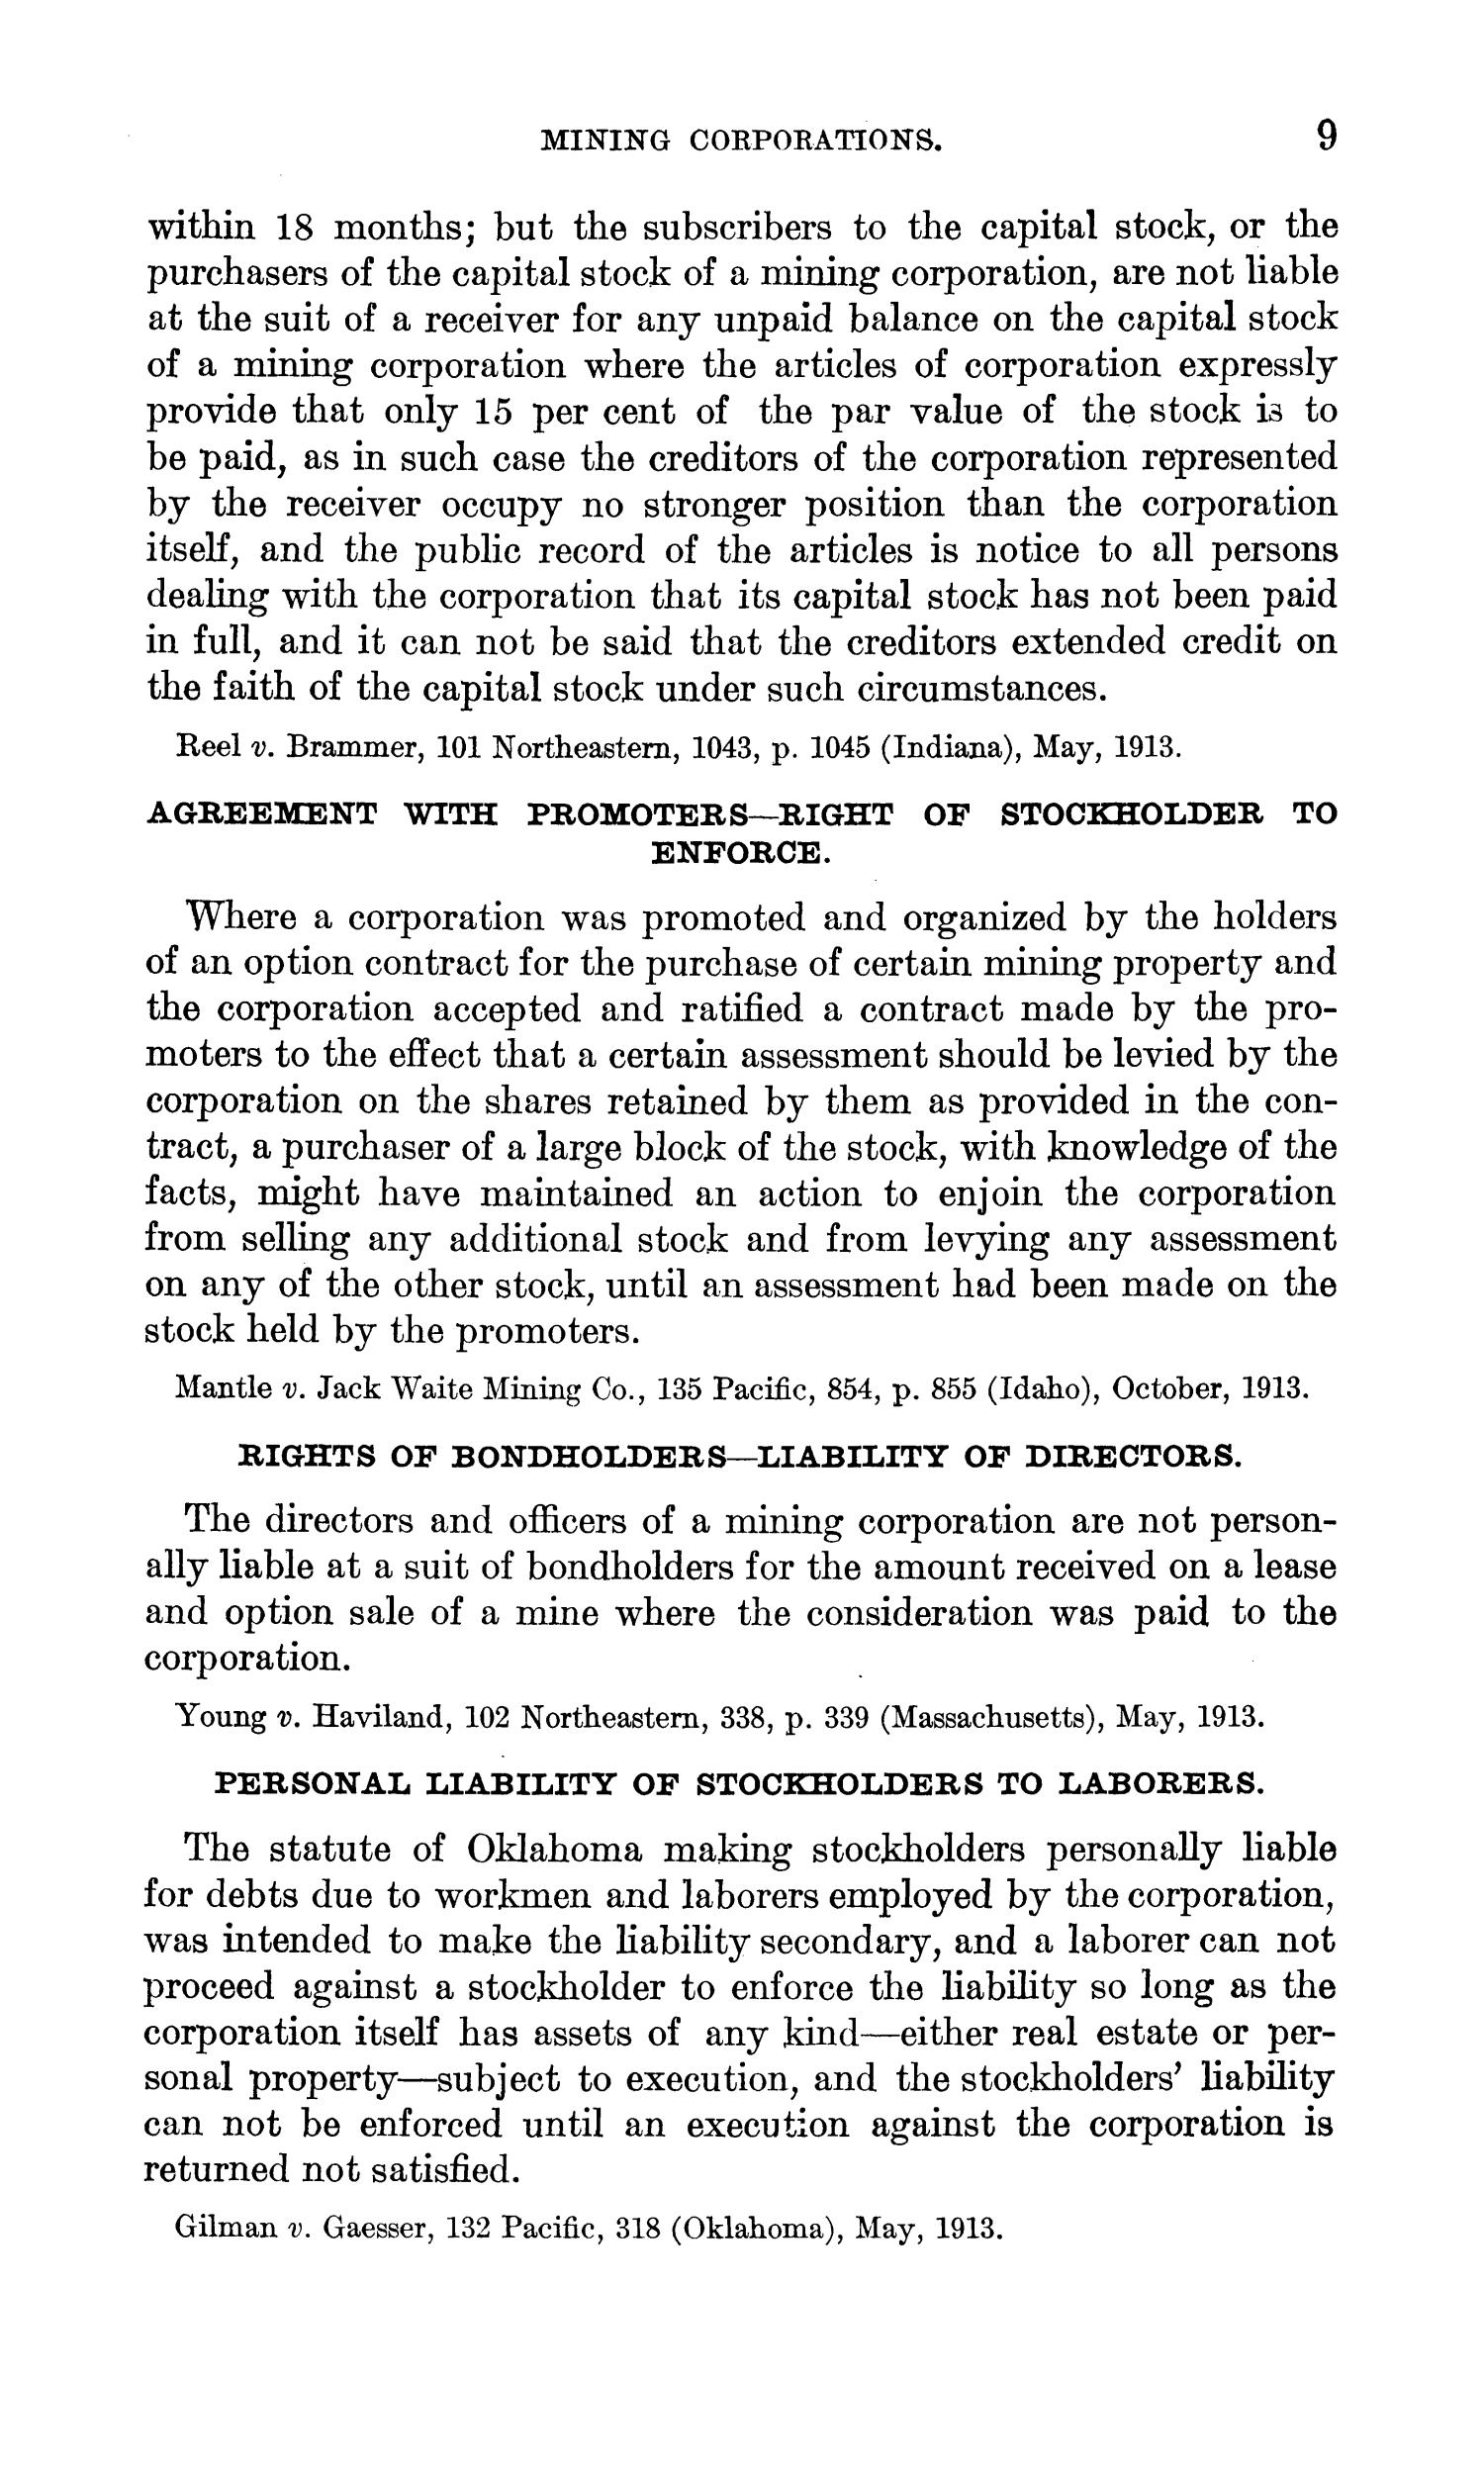 Abstracts of Current Decisions on Mines and Mining: March to December, 1913
                                                
                                                    9
                                                